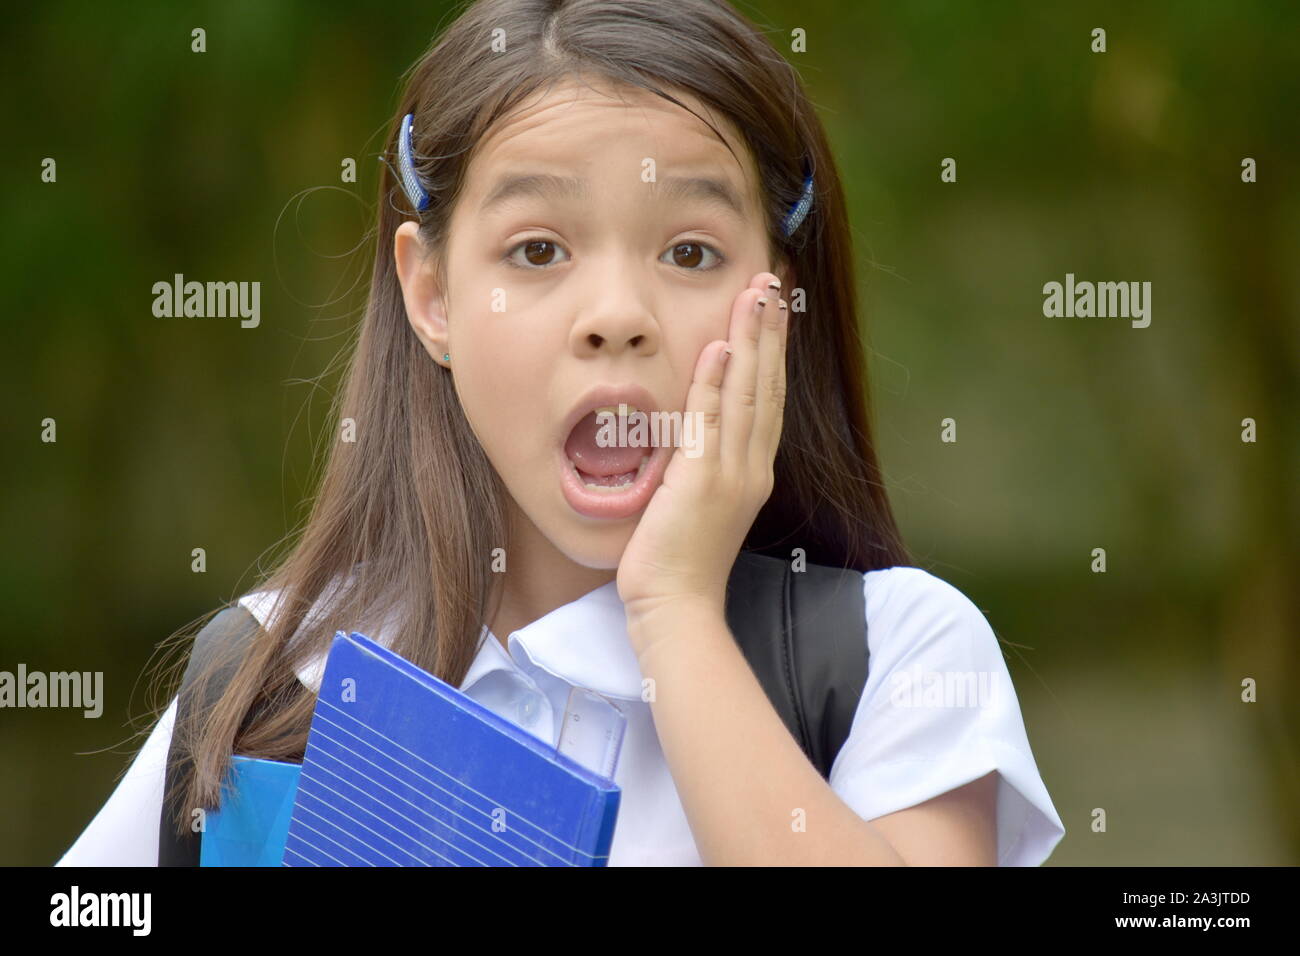 Shocked Cute Asian Girl Student Wearing Uniform With Notebooks Stock Photo